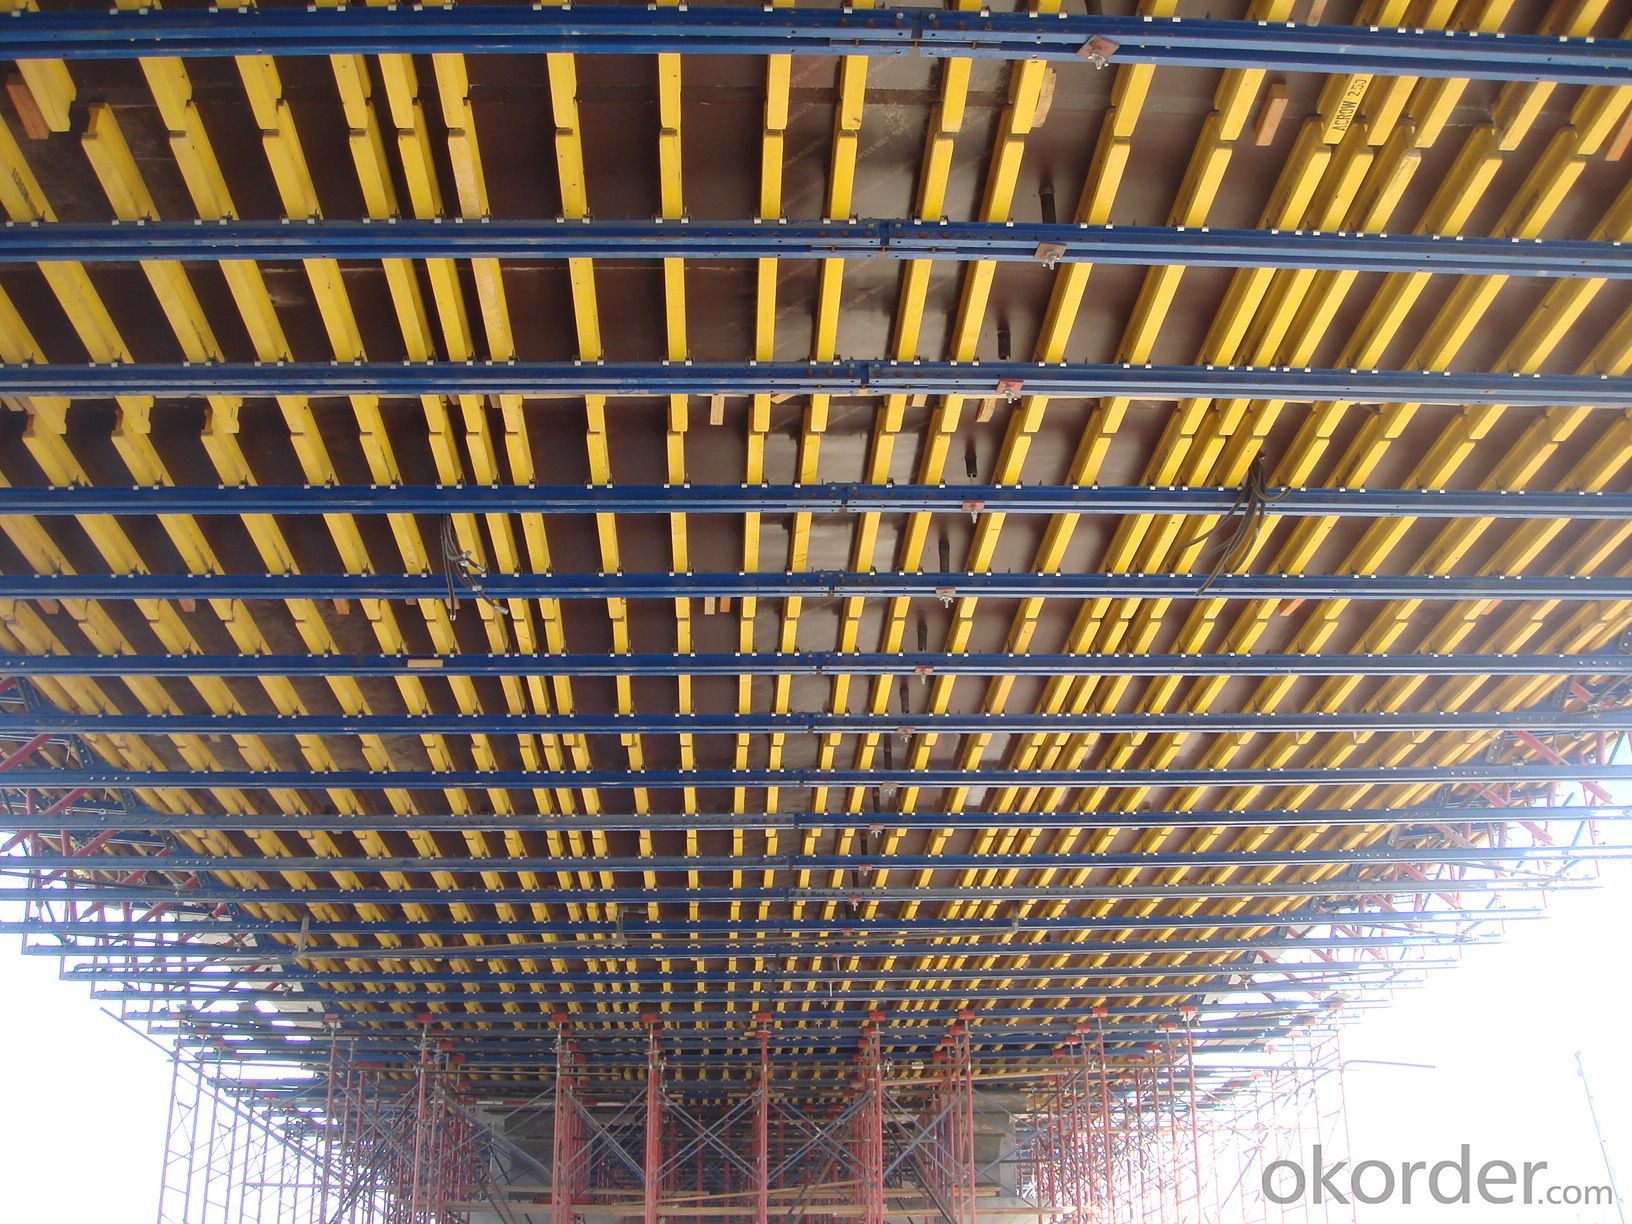 Scaffold Formwork with Timber Beam